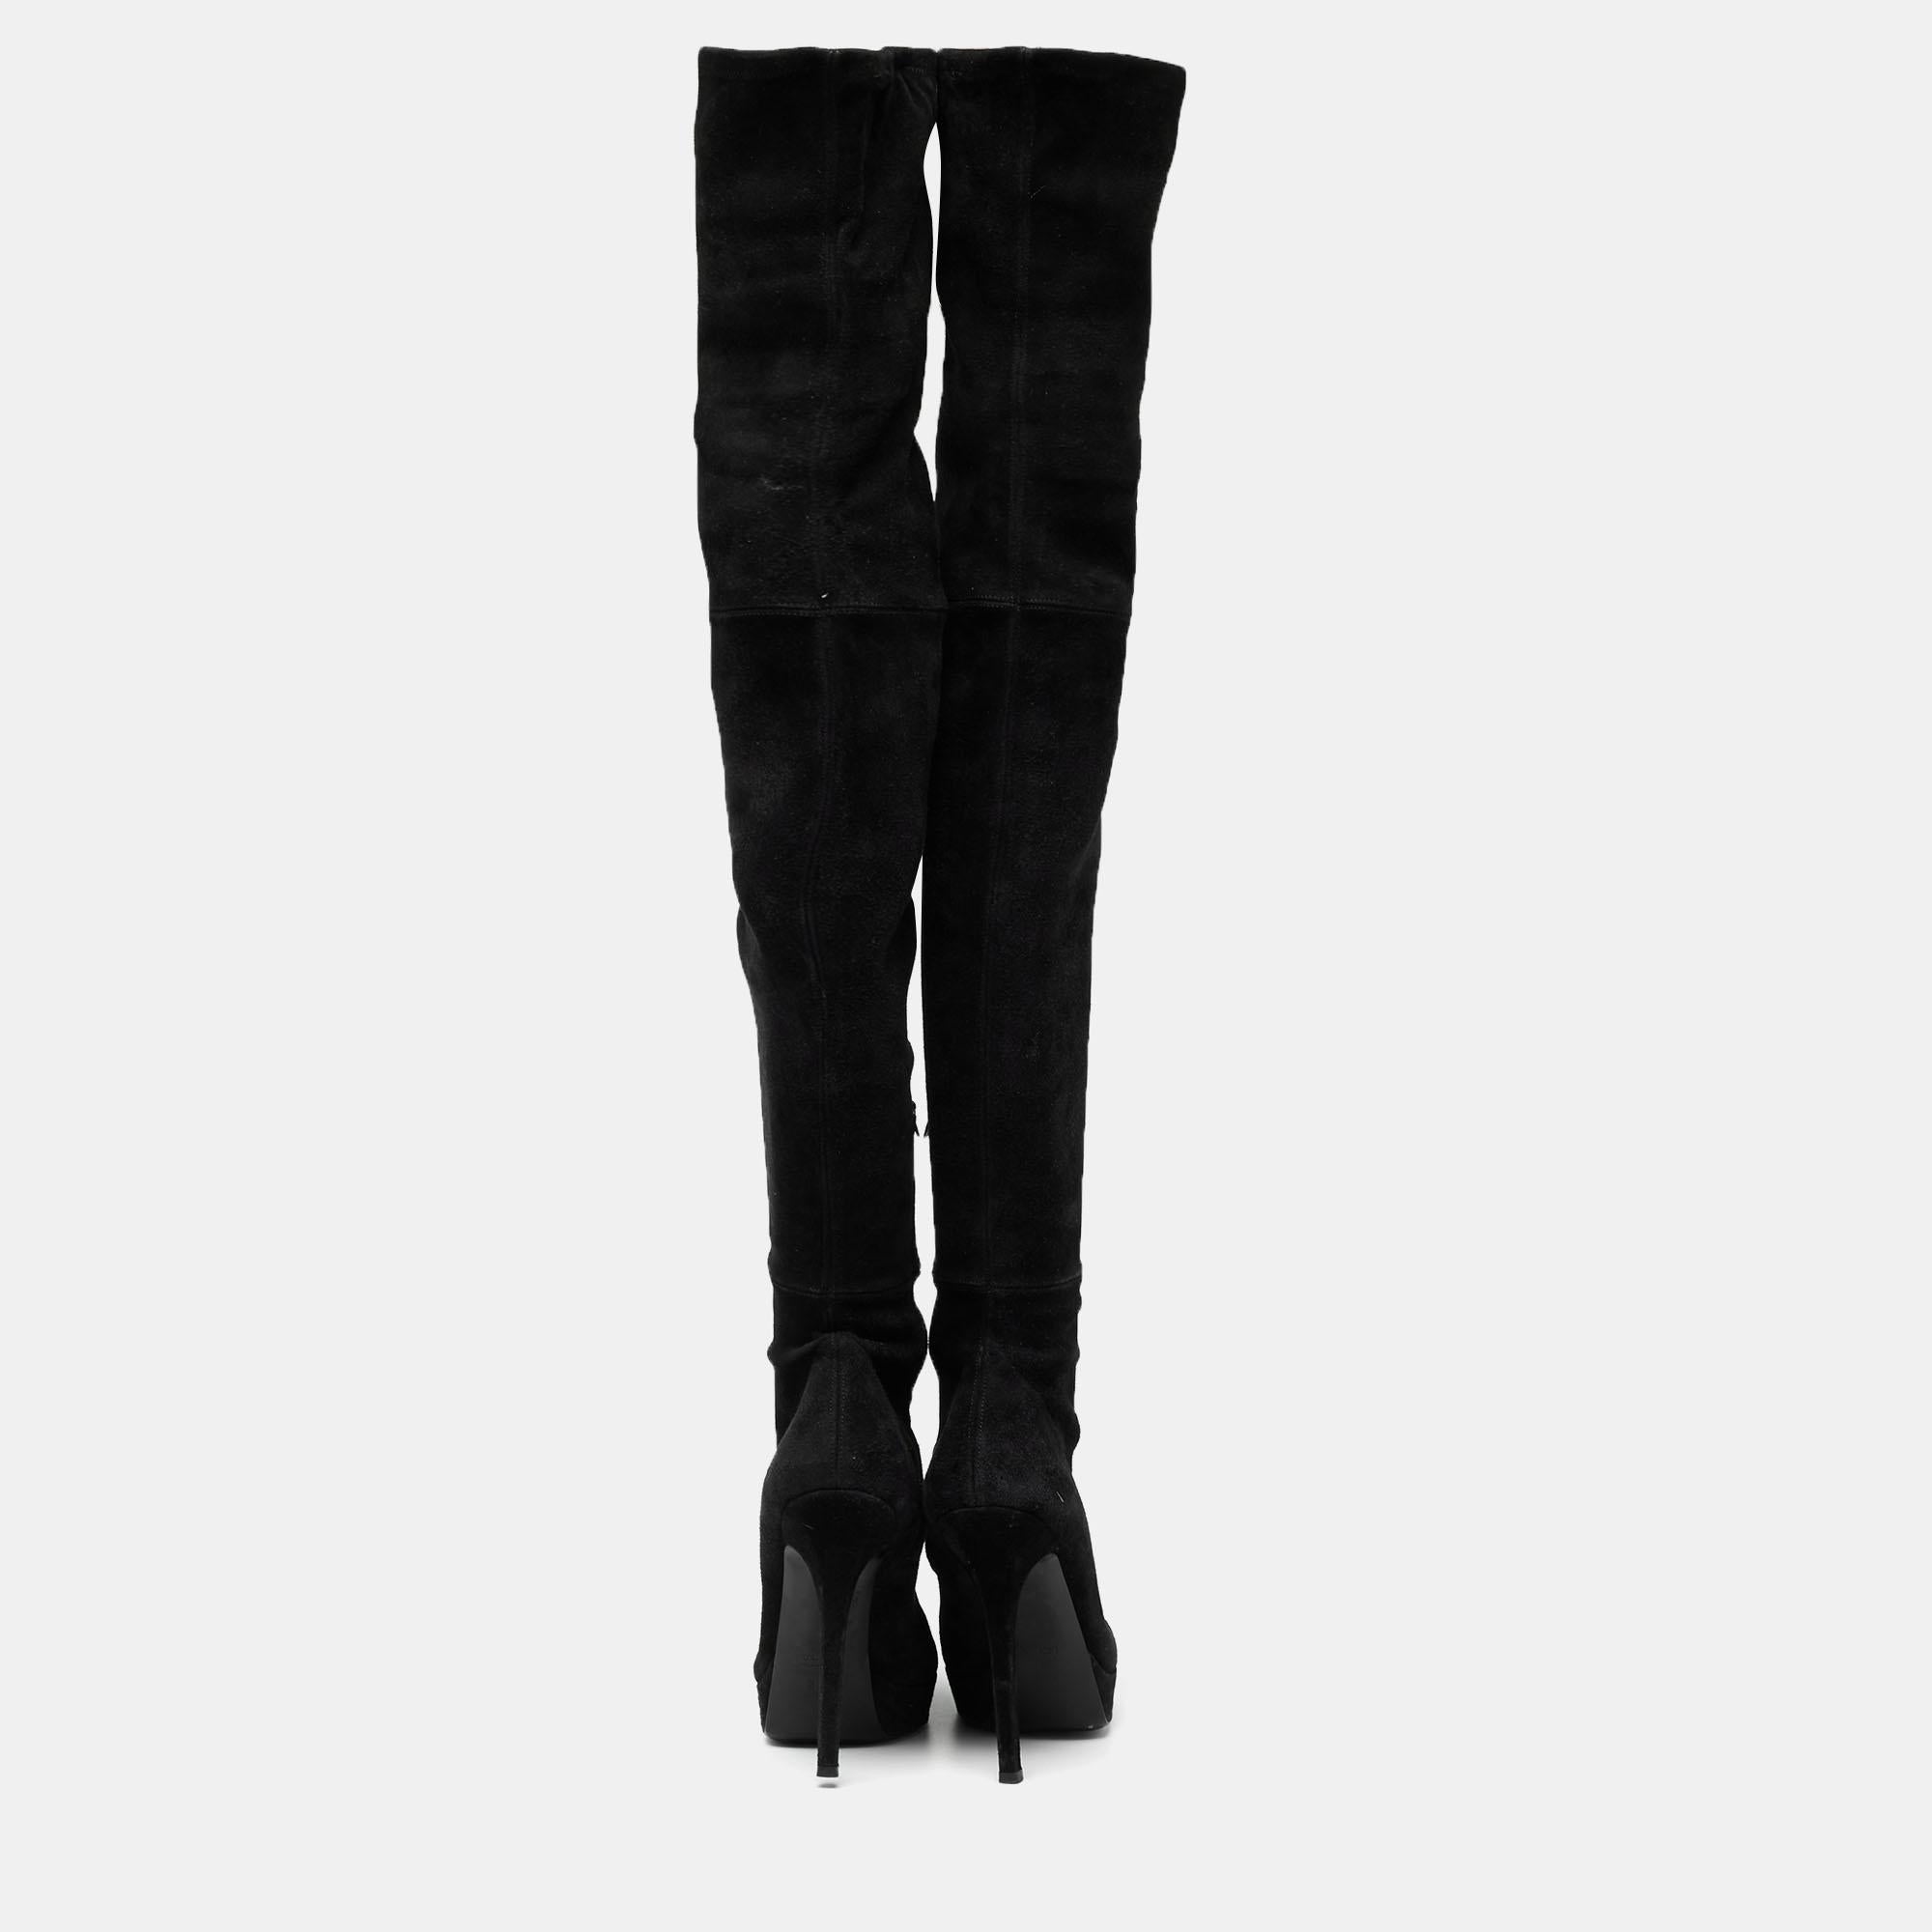 Gucci Black Suede Platform Over the Knee Boots Size 38.5 For Sale 1